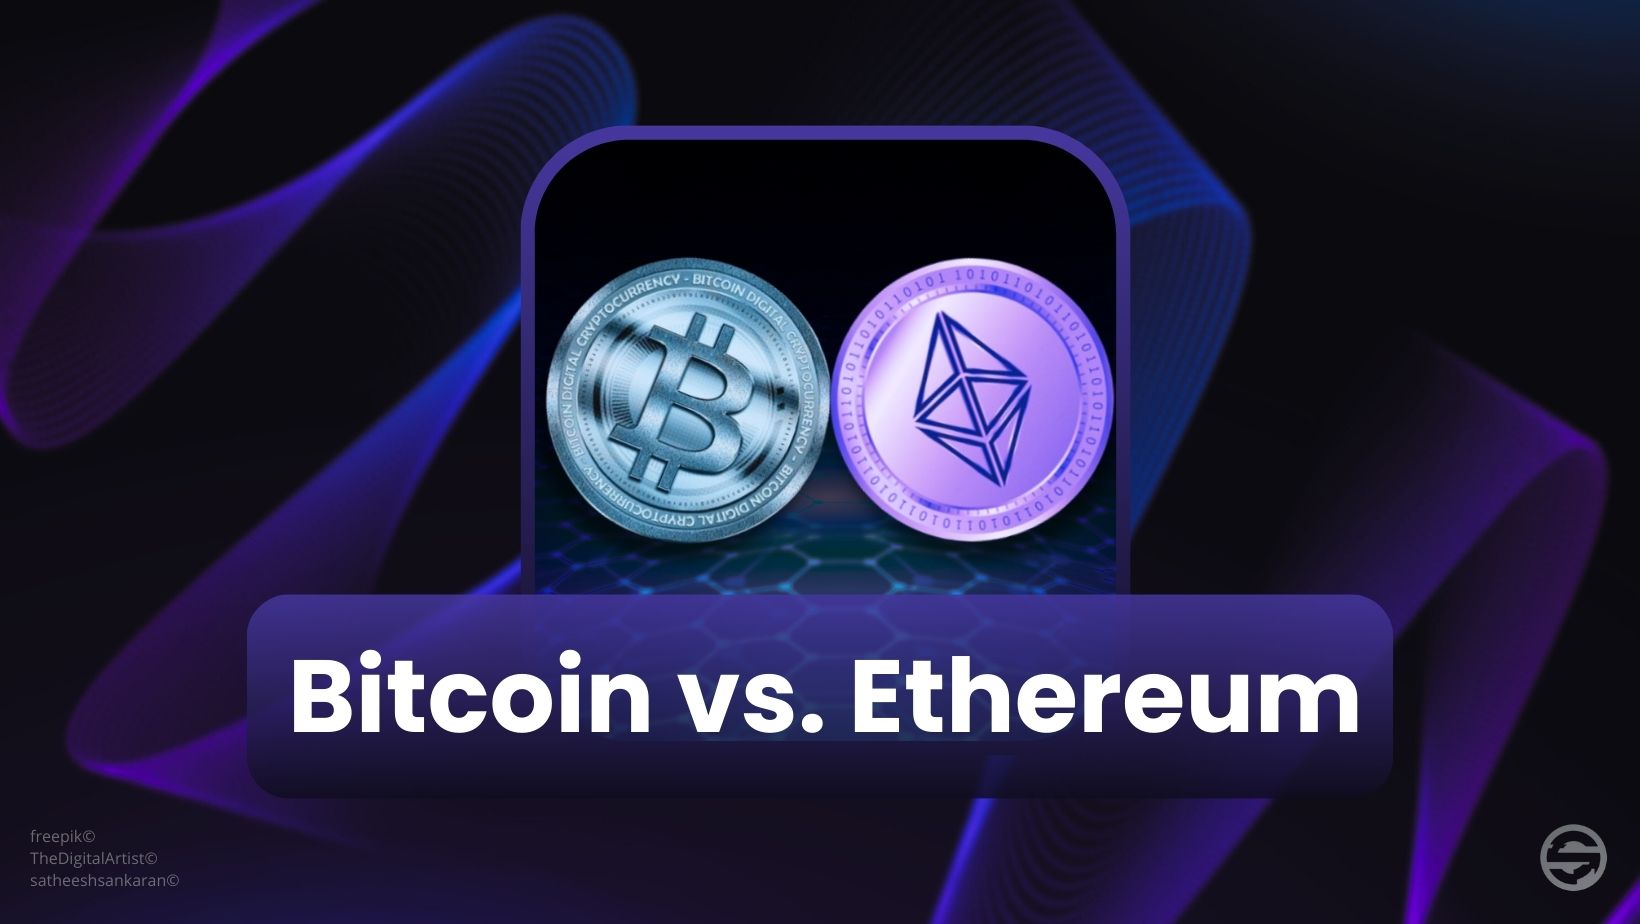 The main distinctions between Bitcoin (BTC) and Ethereum (ETH)